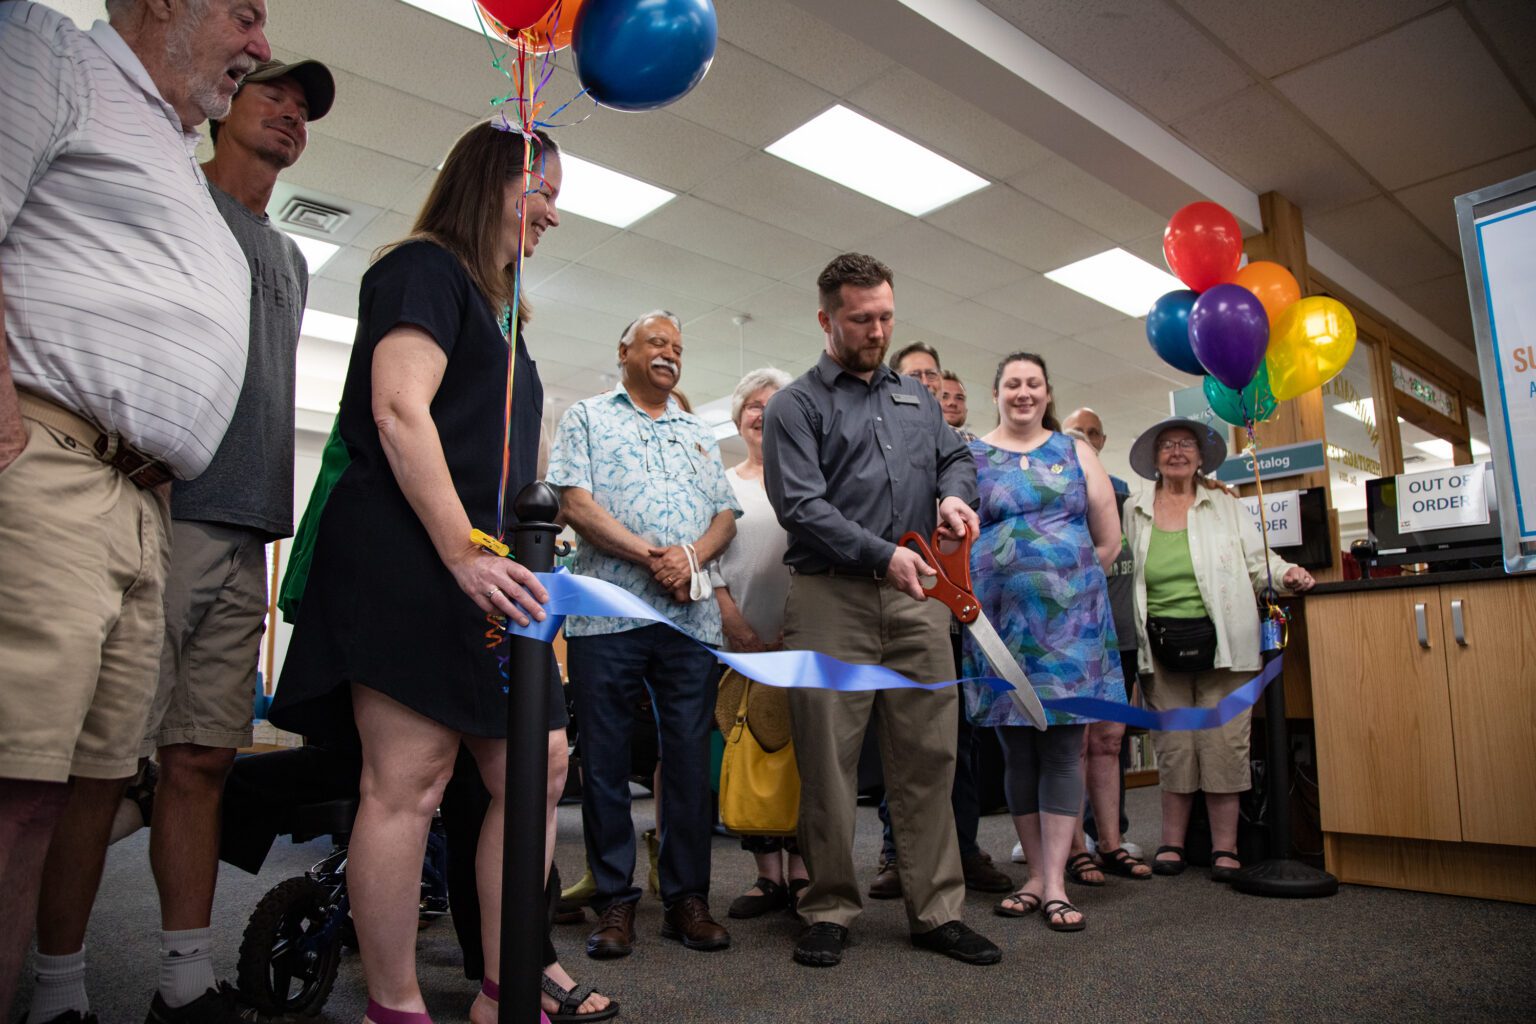 Branch manager Paul Fullner cuts the ribbon celebrating the renovation of the Everson McBeath Community Library on June 27. The new building features new custom shelves for the books